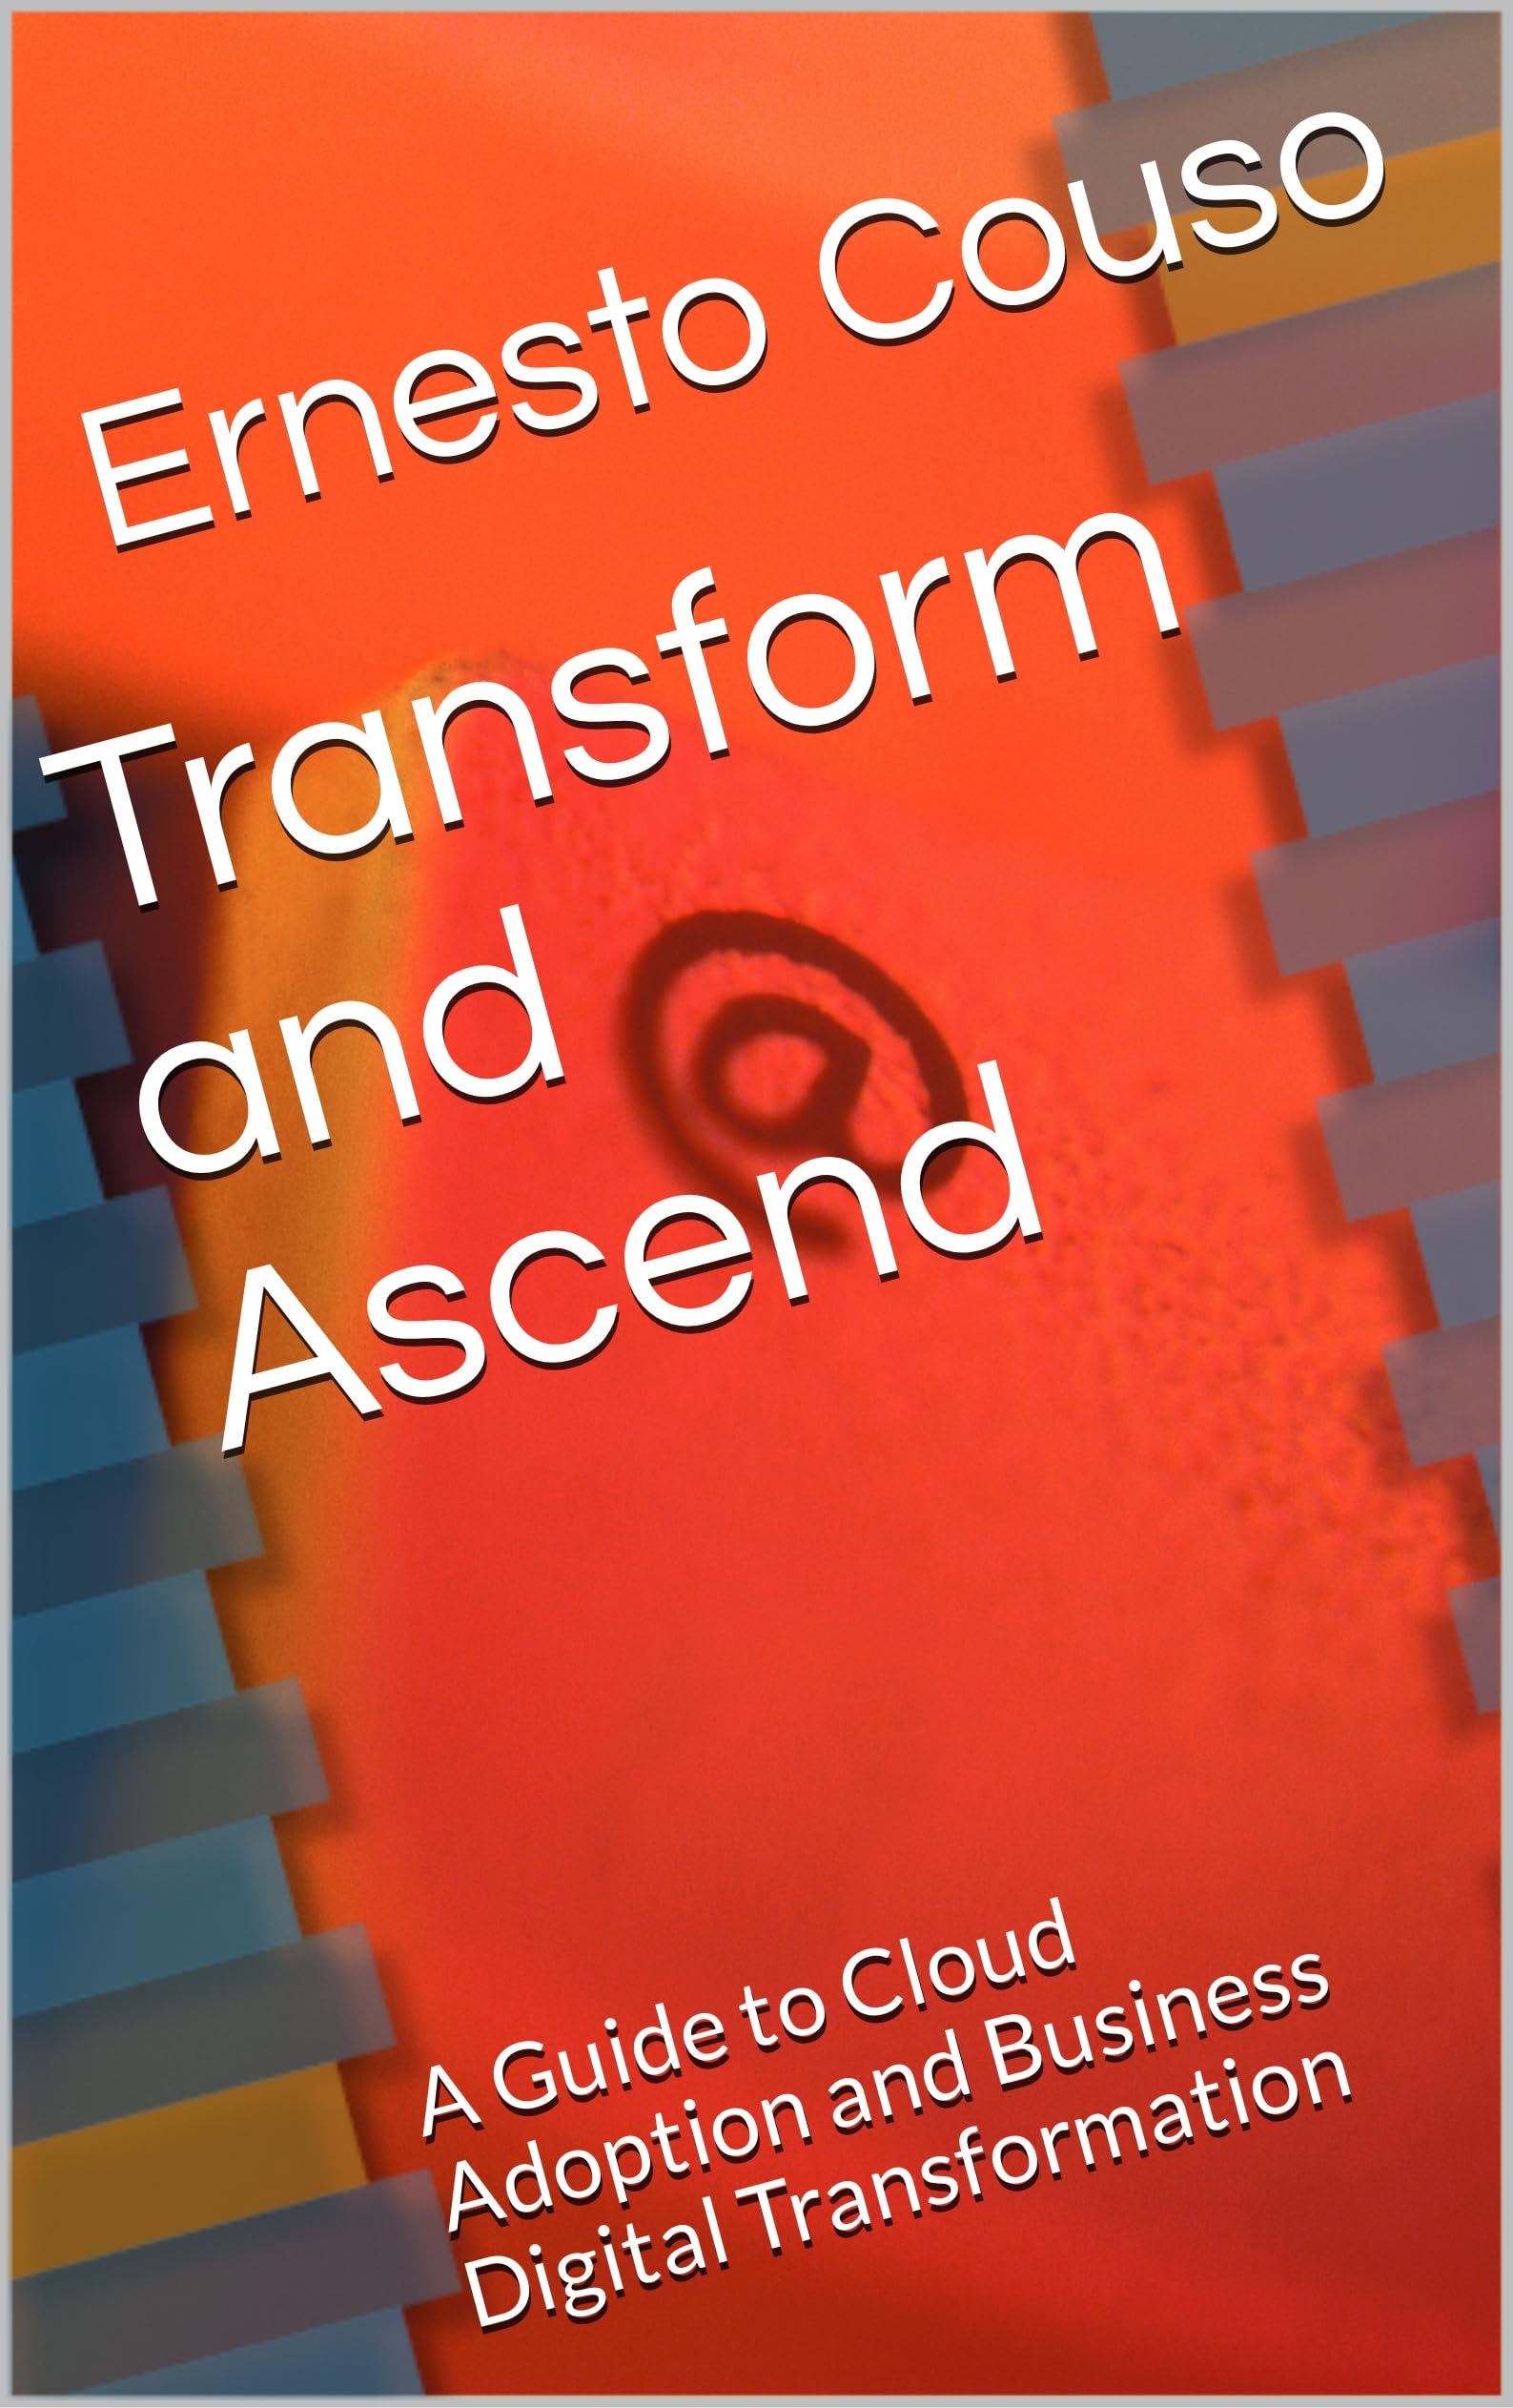 Transform and Ascend: A Guide to Cloud Adoption and Business Digital Transformation